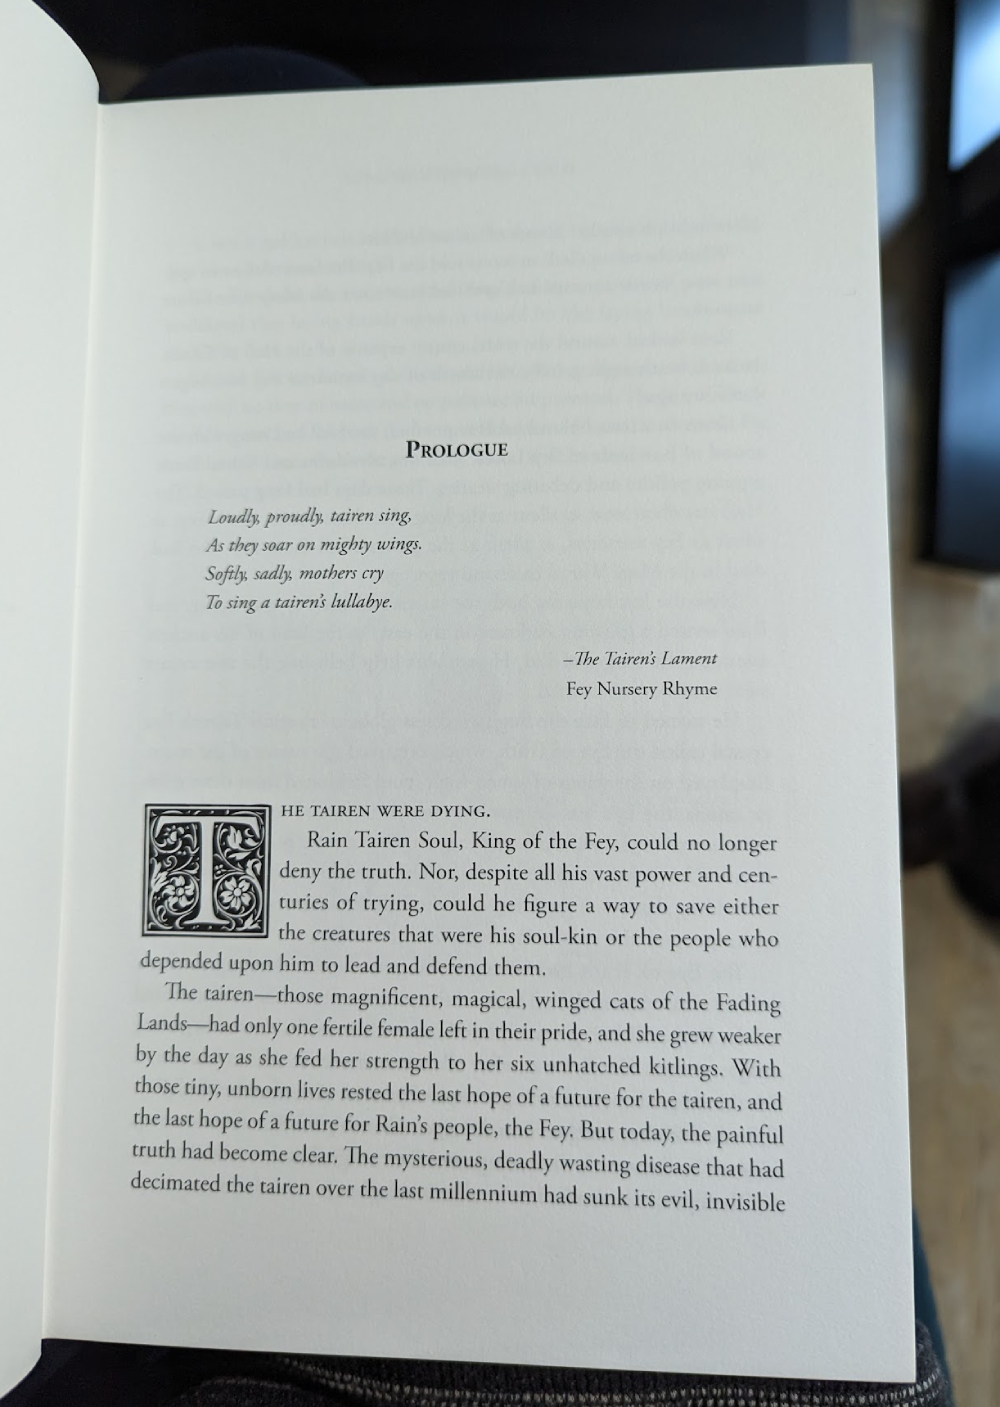 Photo of the page of a book. At the top it says "Prologue" in large heading text, with a short poem underneath it. The first paragraph has a drop cap (letter "T" with intricate flower designs around it).